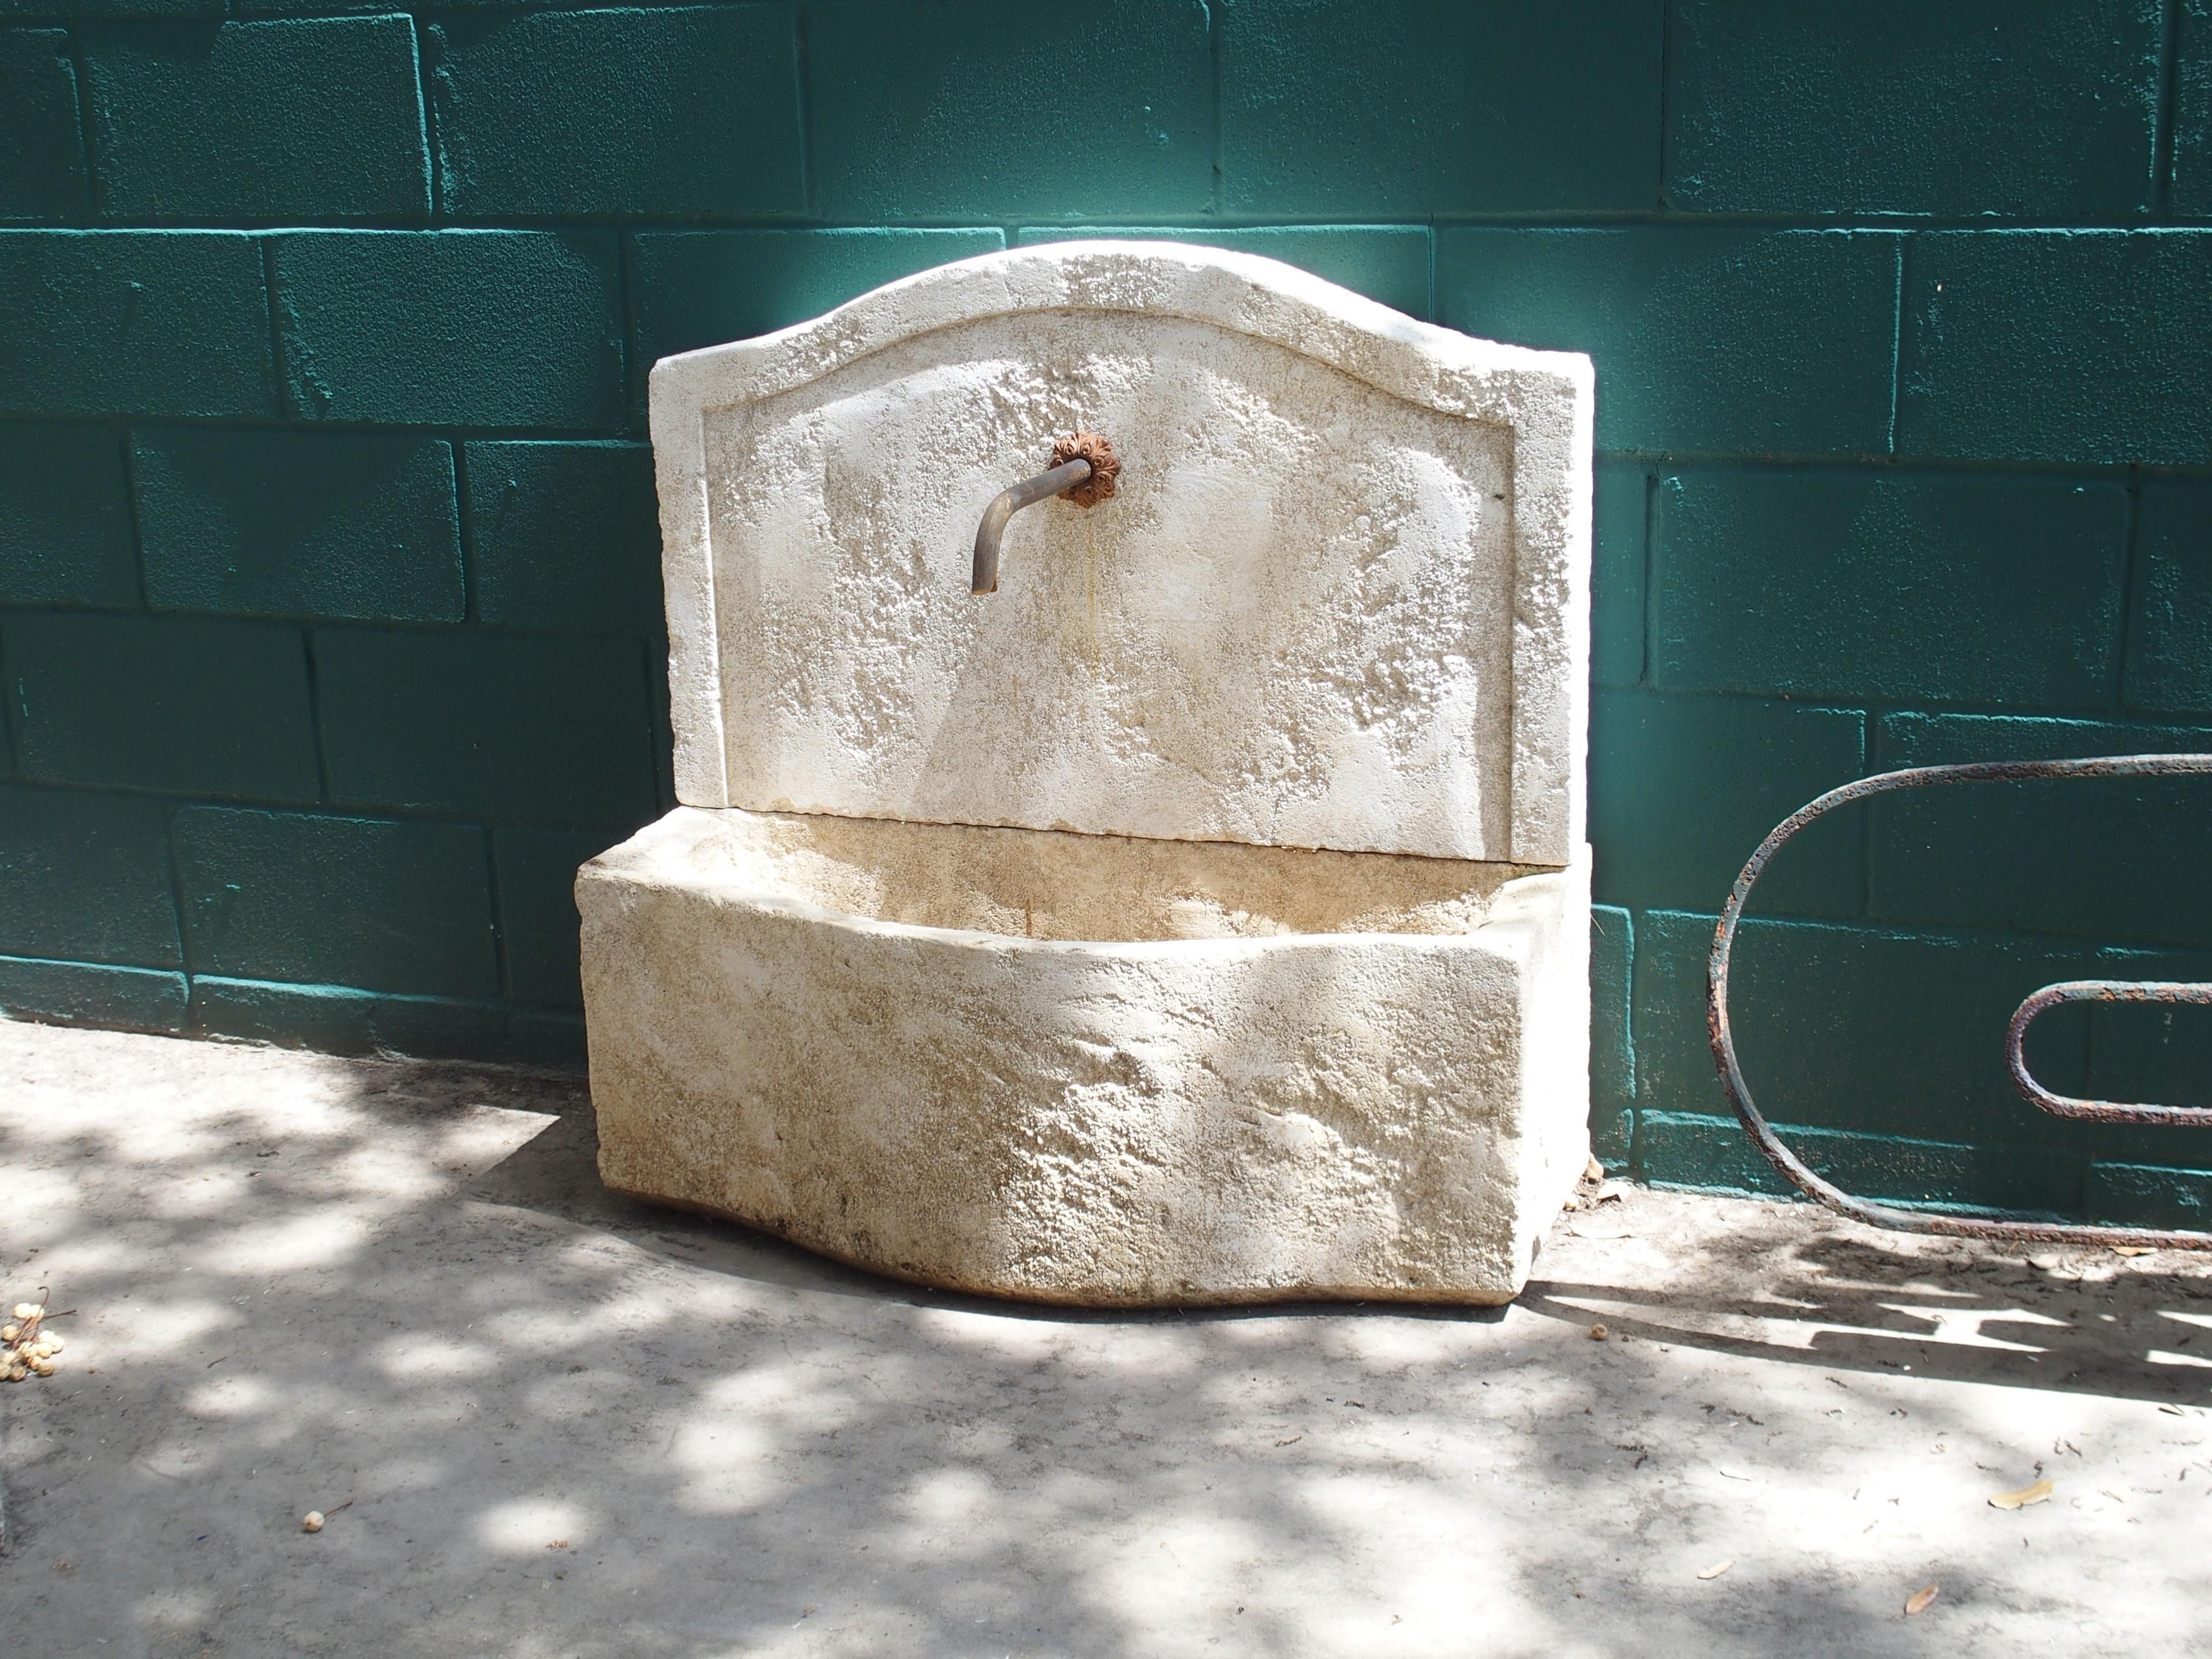 This small, rustic wall fountain was hand-carved in the South of France with local limestone. An artistic French finishing technique has been used to give the appearance of age, while exposure to the elements has provided a nice cream and white